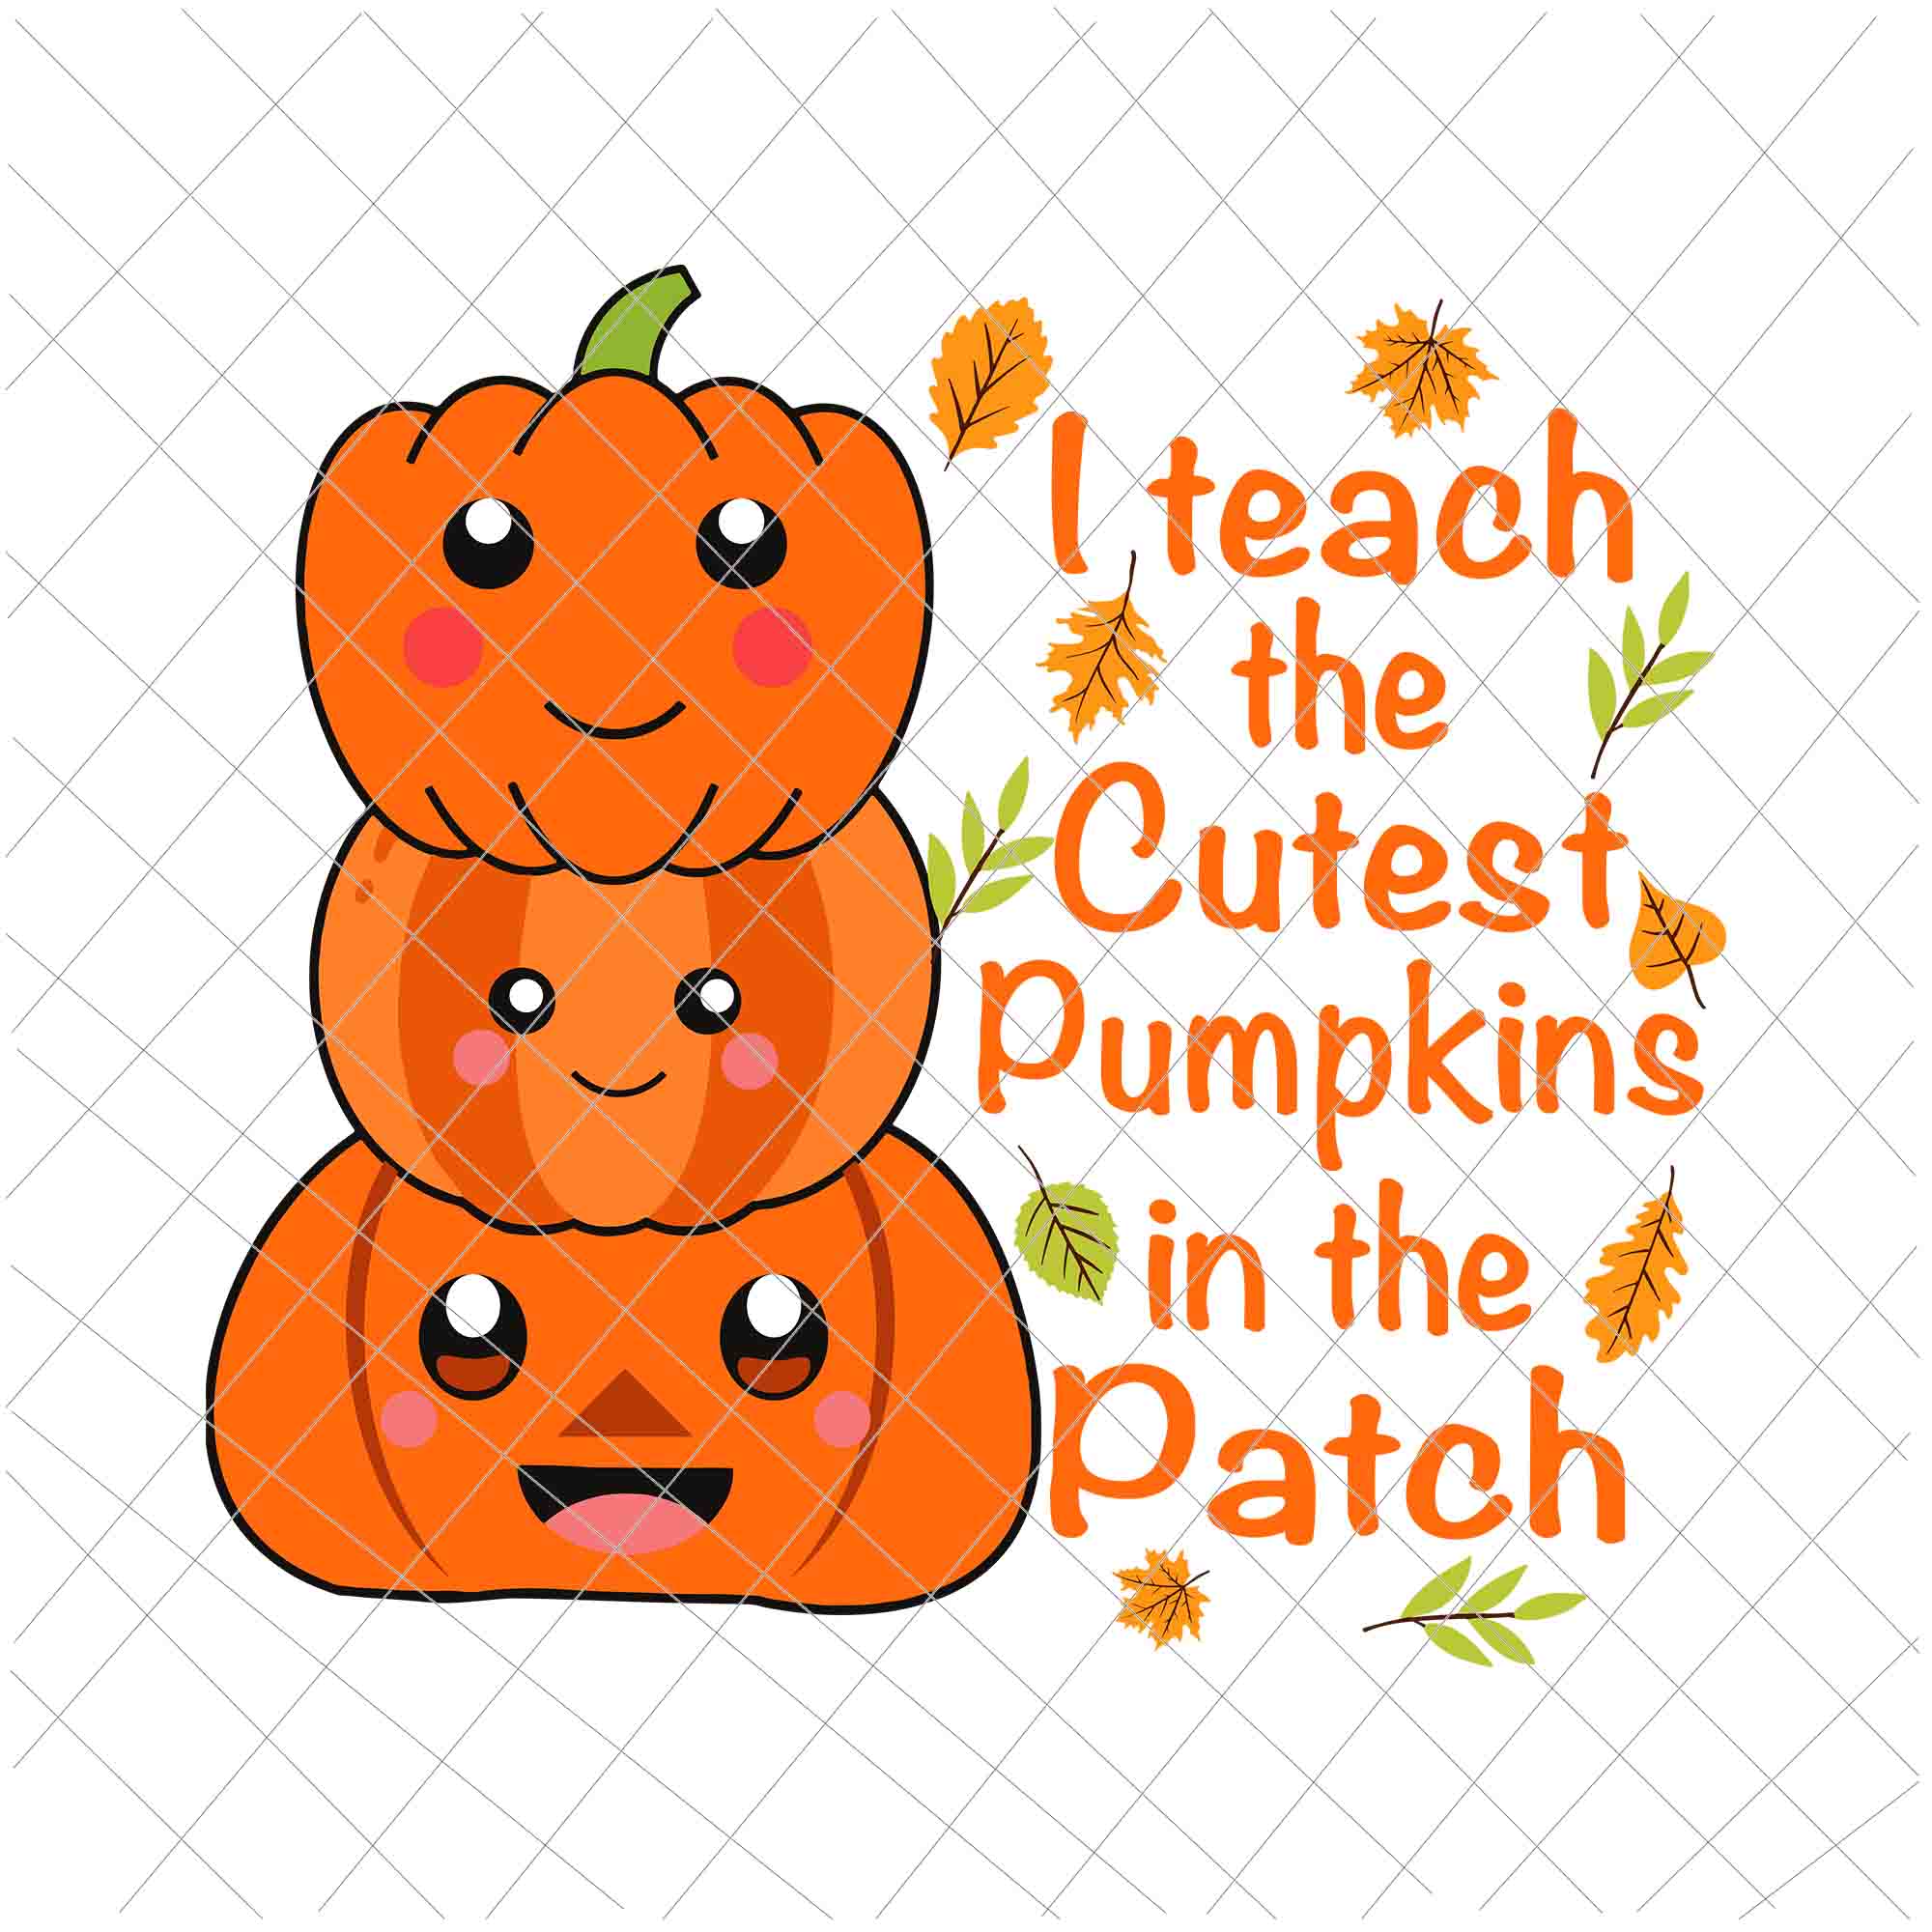 I Teach The Cutest Pumpkins In The Patch Svg,  Teacher Fall Season Svg, Teacher Autumn Svg, Teacher Quote Svg